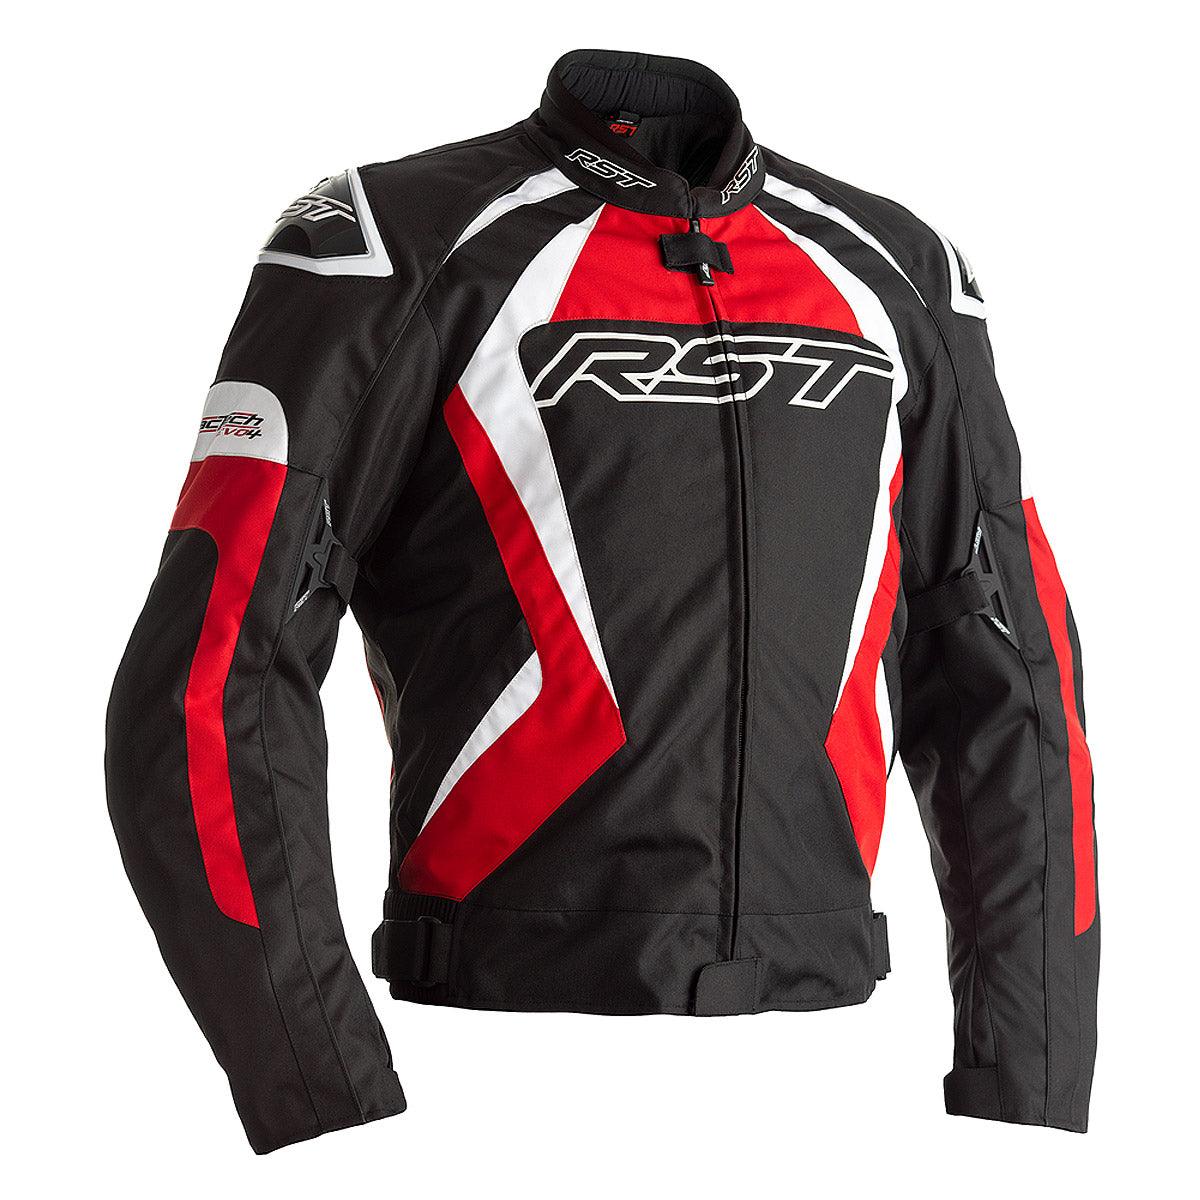 RST Tractech Evo 4 Textile Jacket CE WP - Black Red | GetGeared.co.uk ...